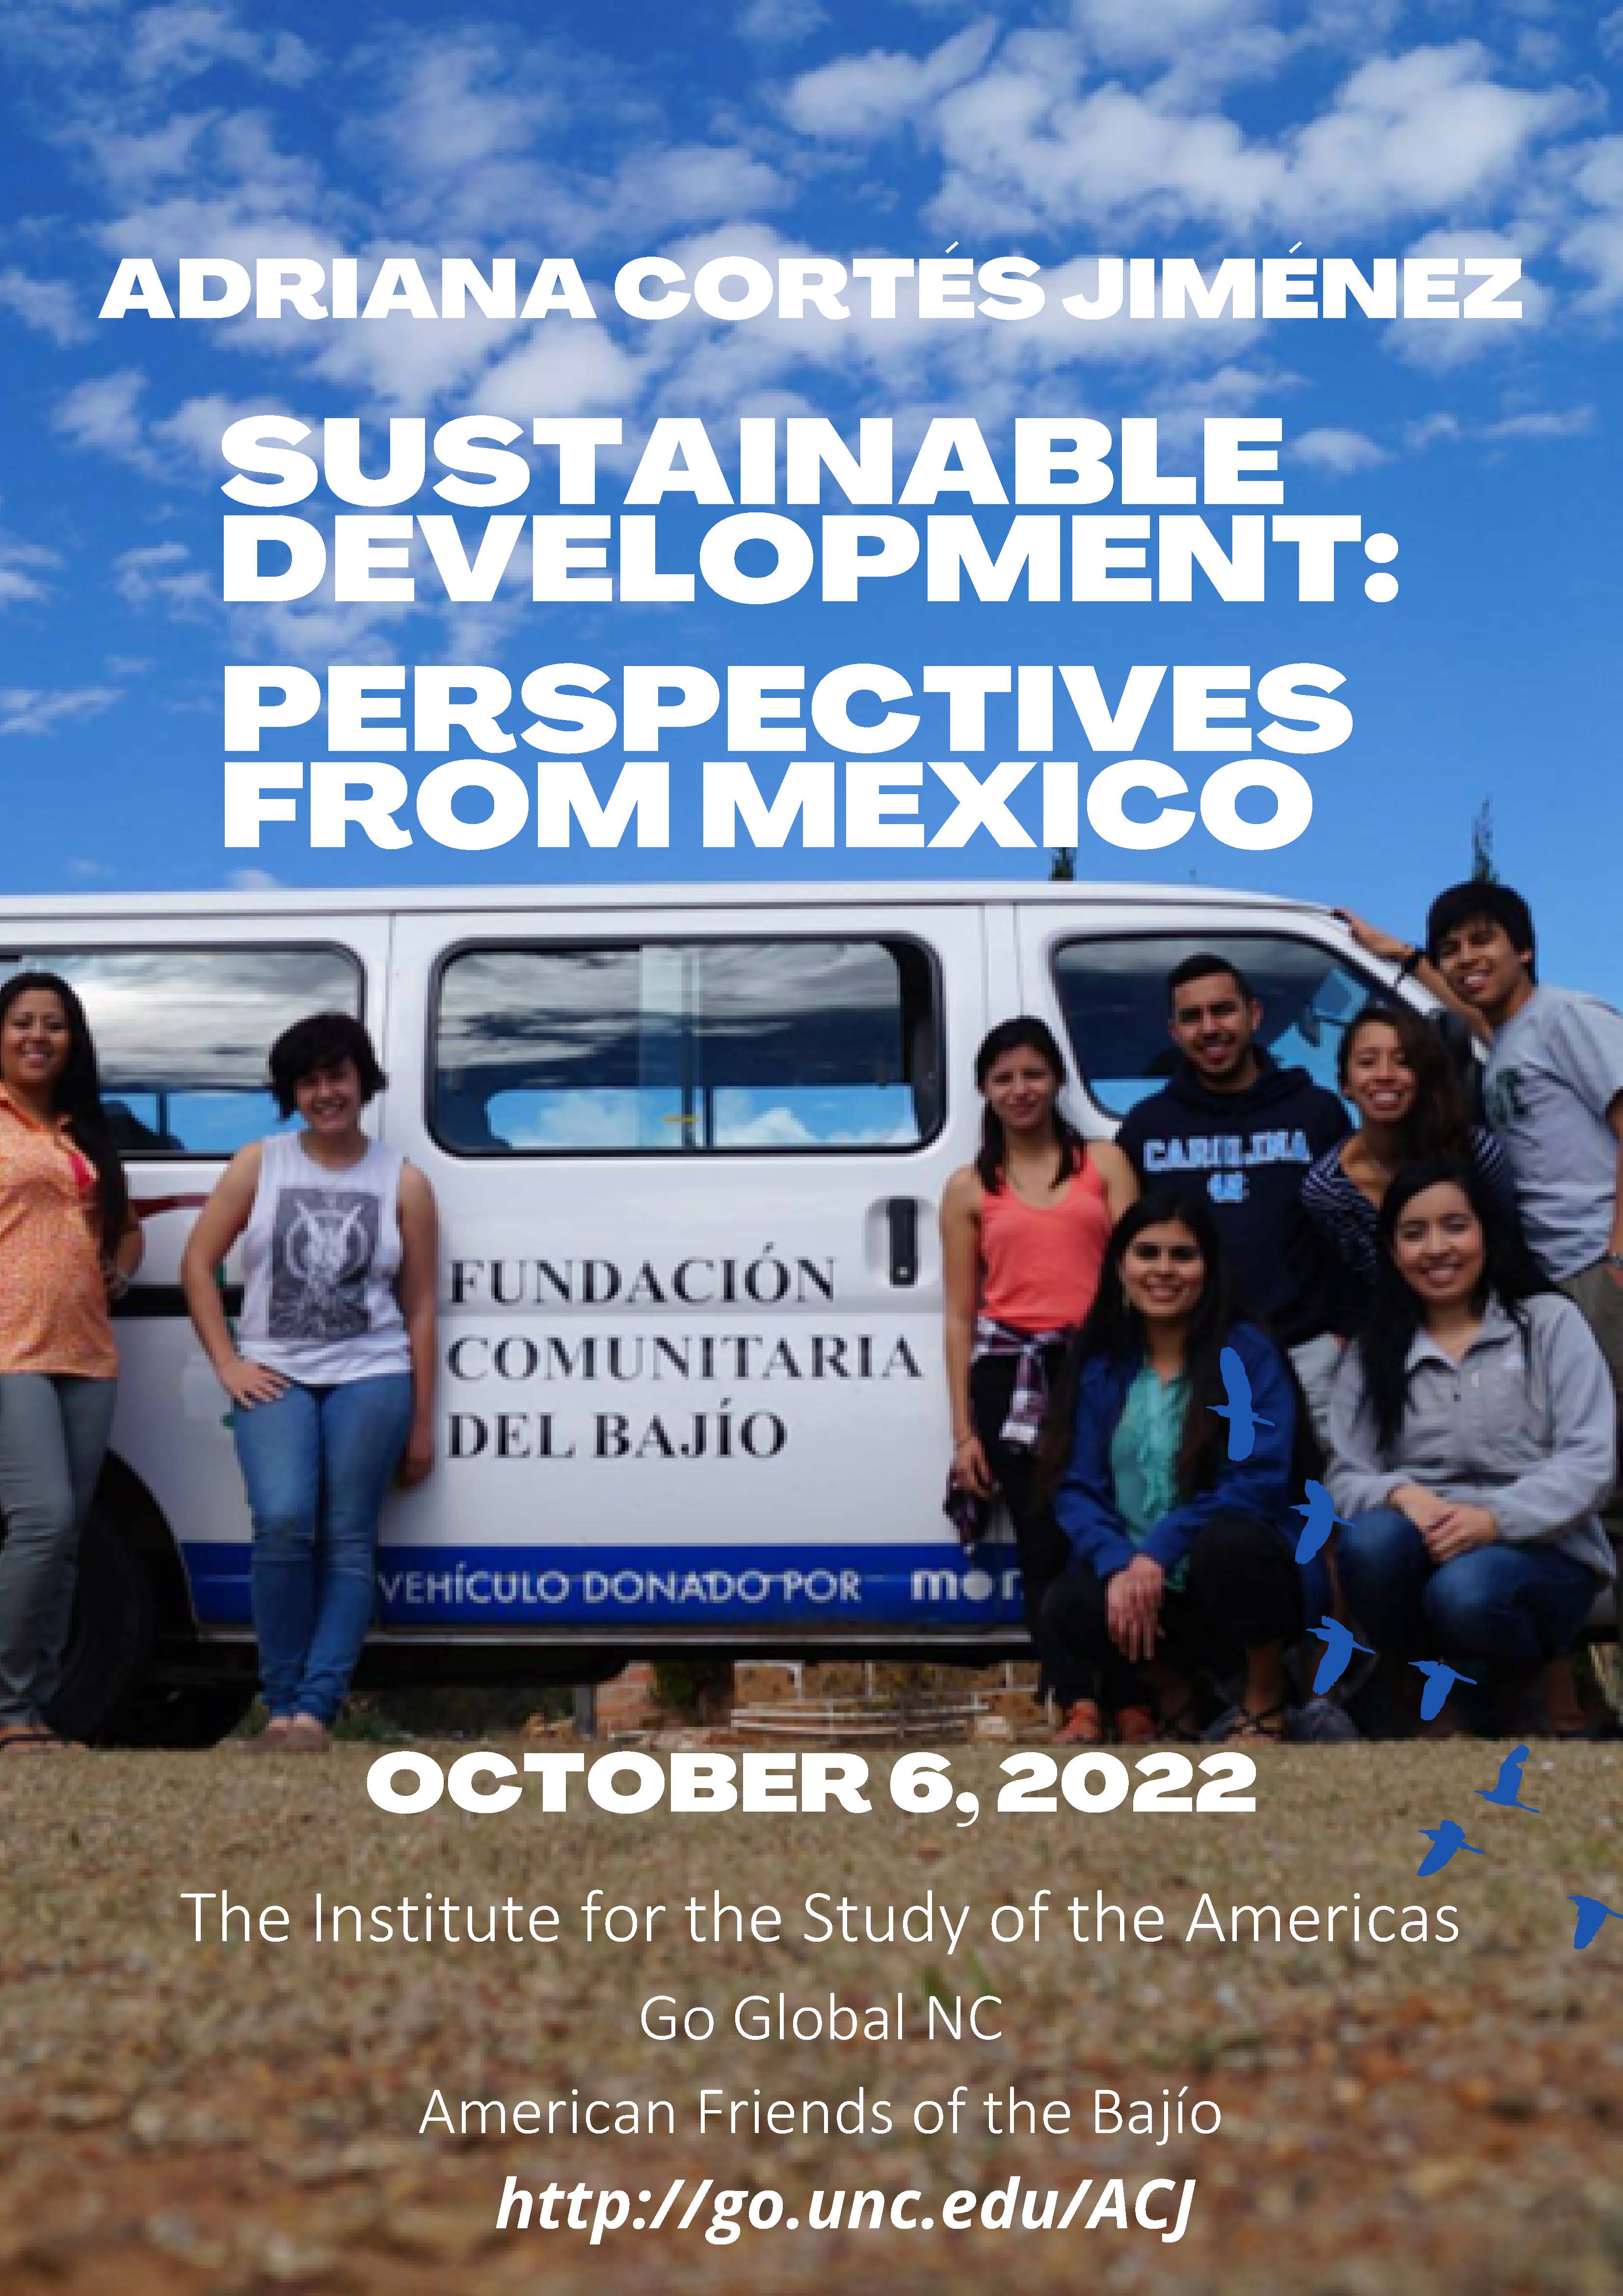 Sustainable Community Development: Perspectives from Mexico